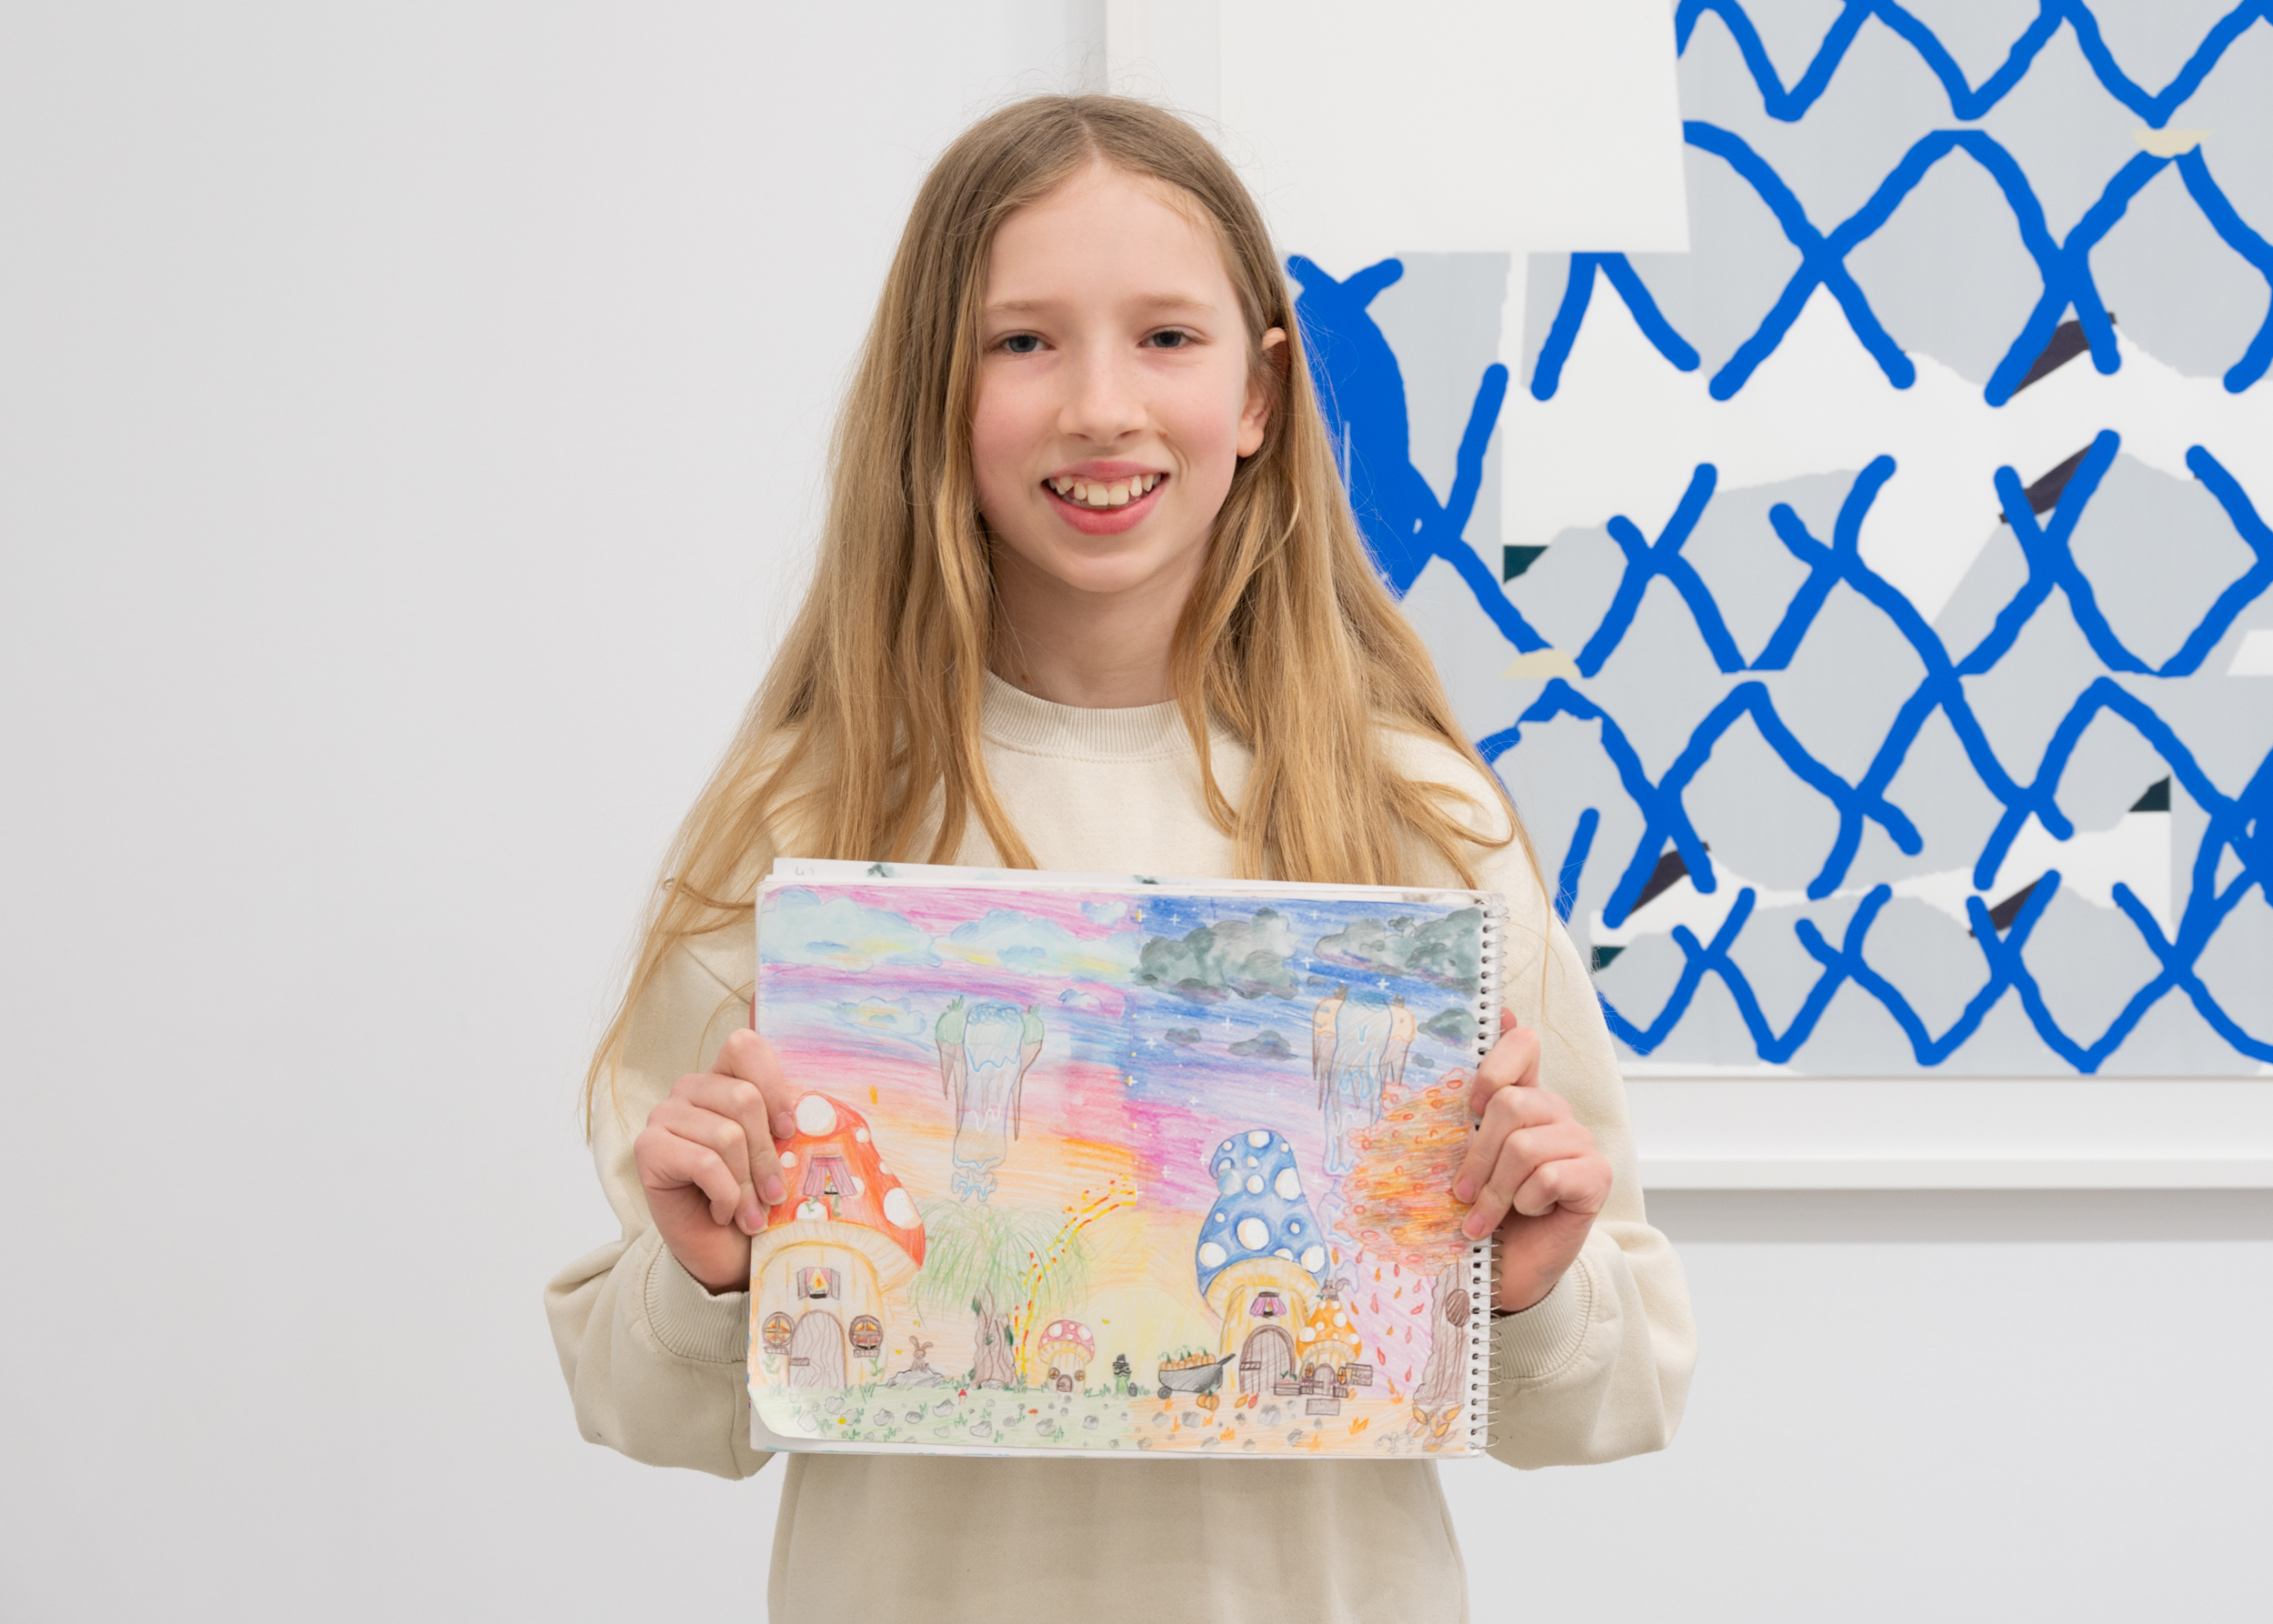 Time to celebrate Young Artist of the Week Adelie!